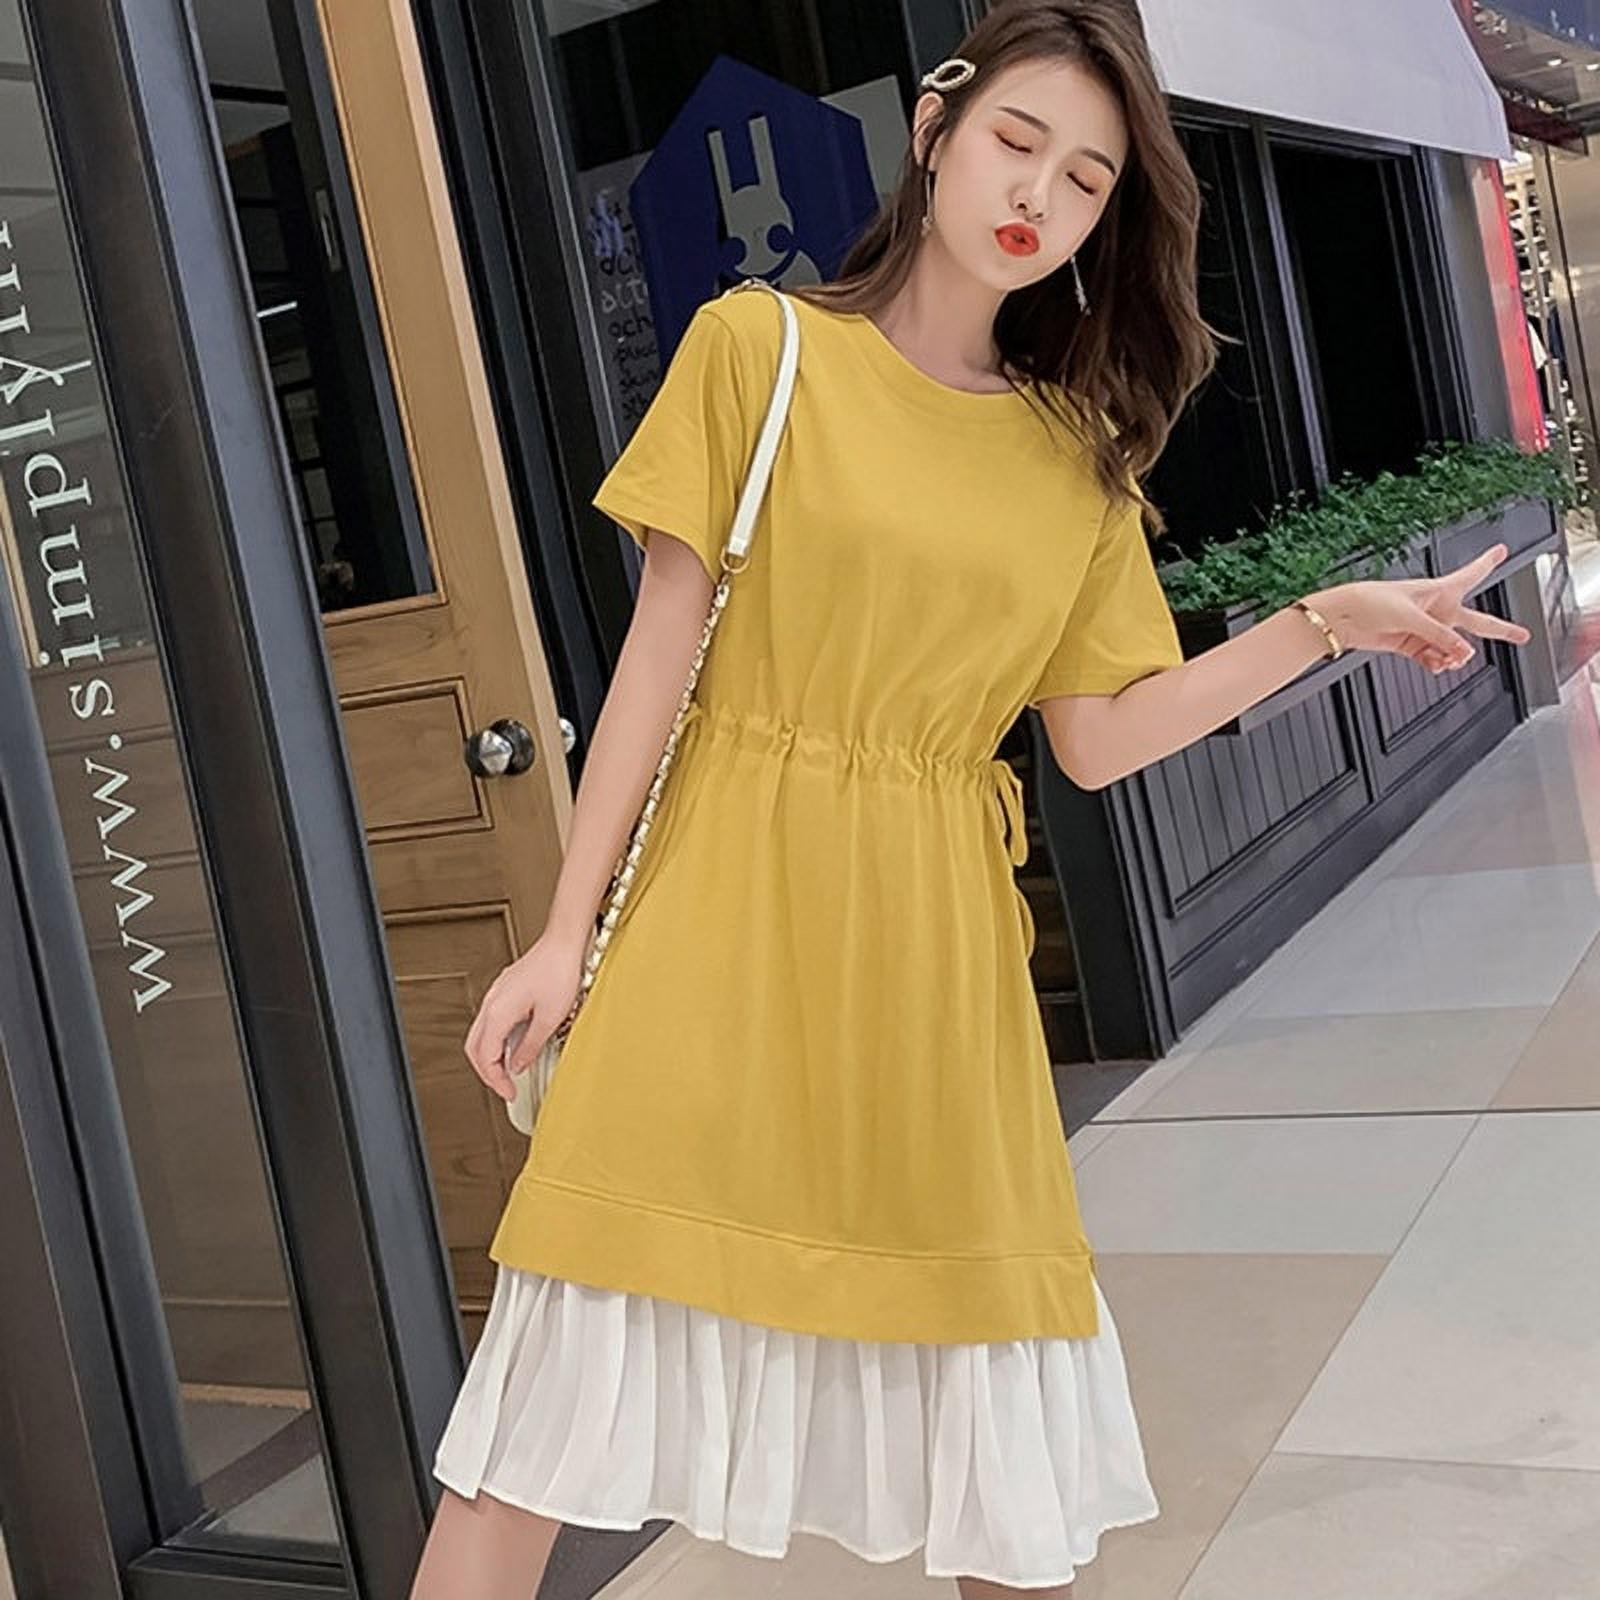 Fashion Novel Design Patchwork Women's Dress Summer Short Sleeve Lace Up  Casual Simple A-Line Fake Two Piece Loose Dress